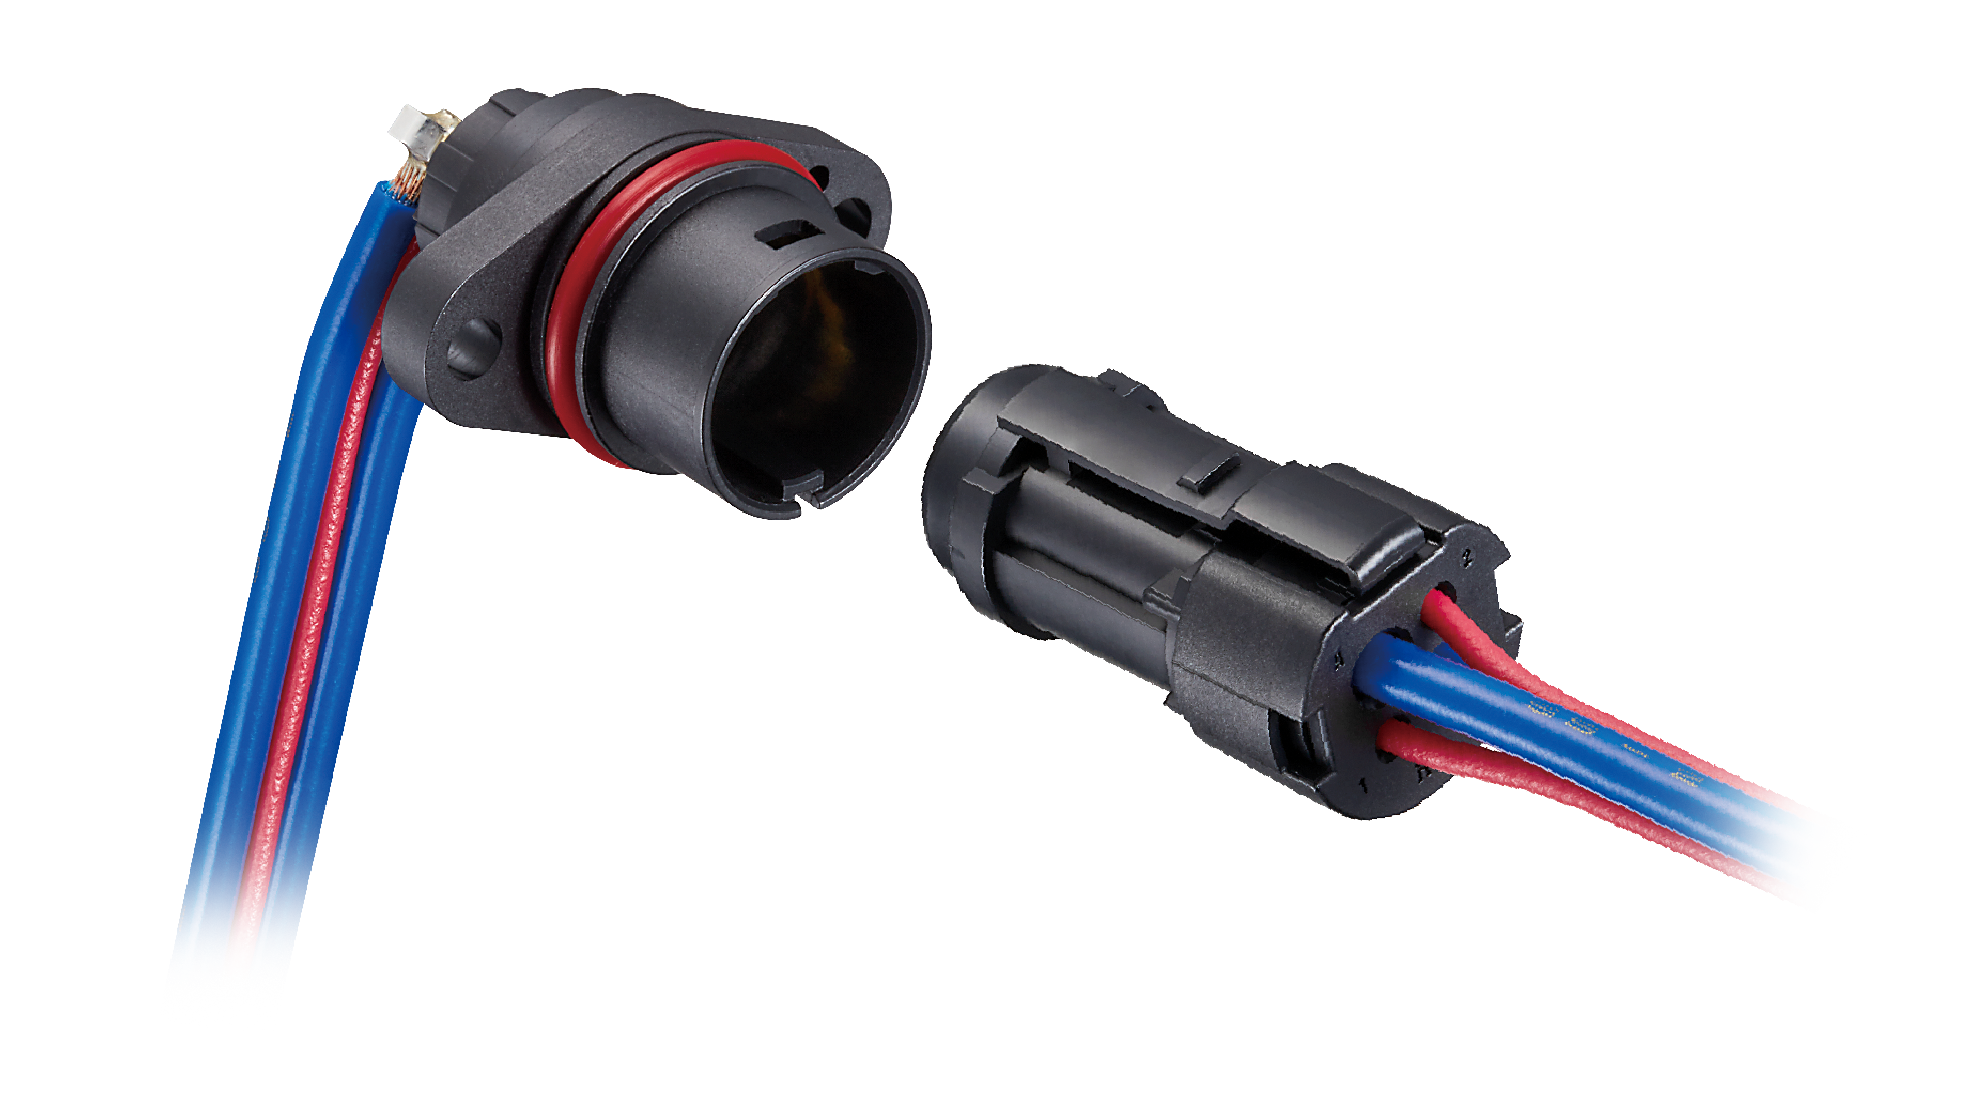 Product | Image of Hiroses BH12 connector, optimized for board-to-board connections, highlighting its high current rating and wide temperature range for micro-mobility applications.